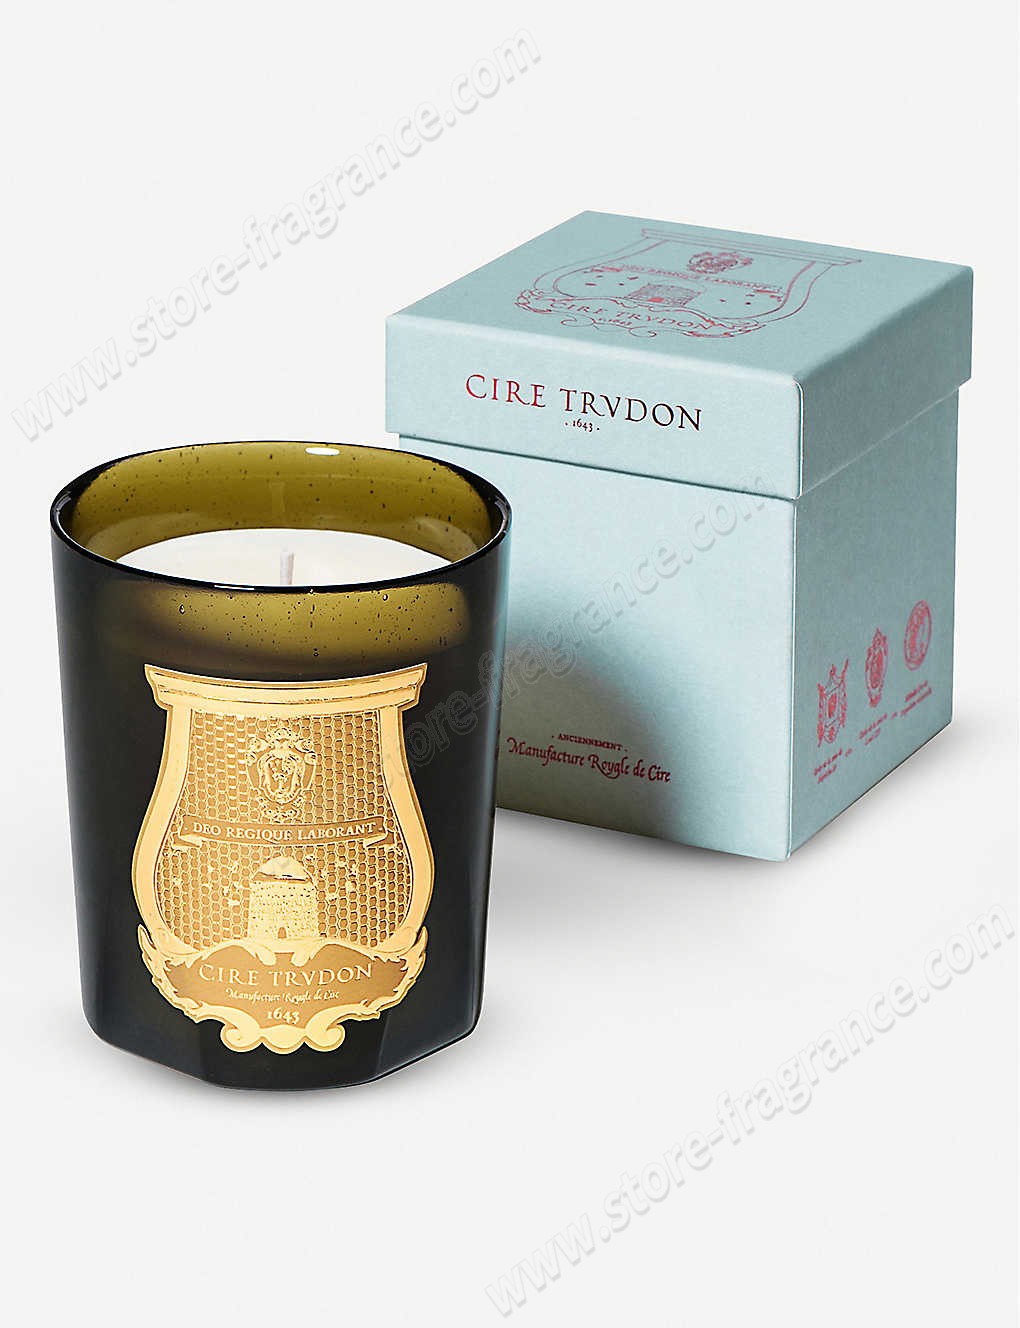 CIRE TRUDON/Roi Soleil scented candle 270g ✿ Discount Store - CIRE TRUDON/Roi Soleil scented candle 270g ✿ Discount Store